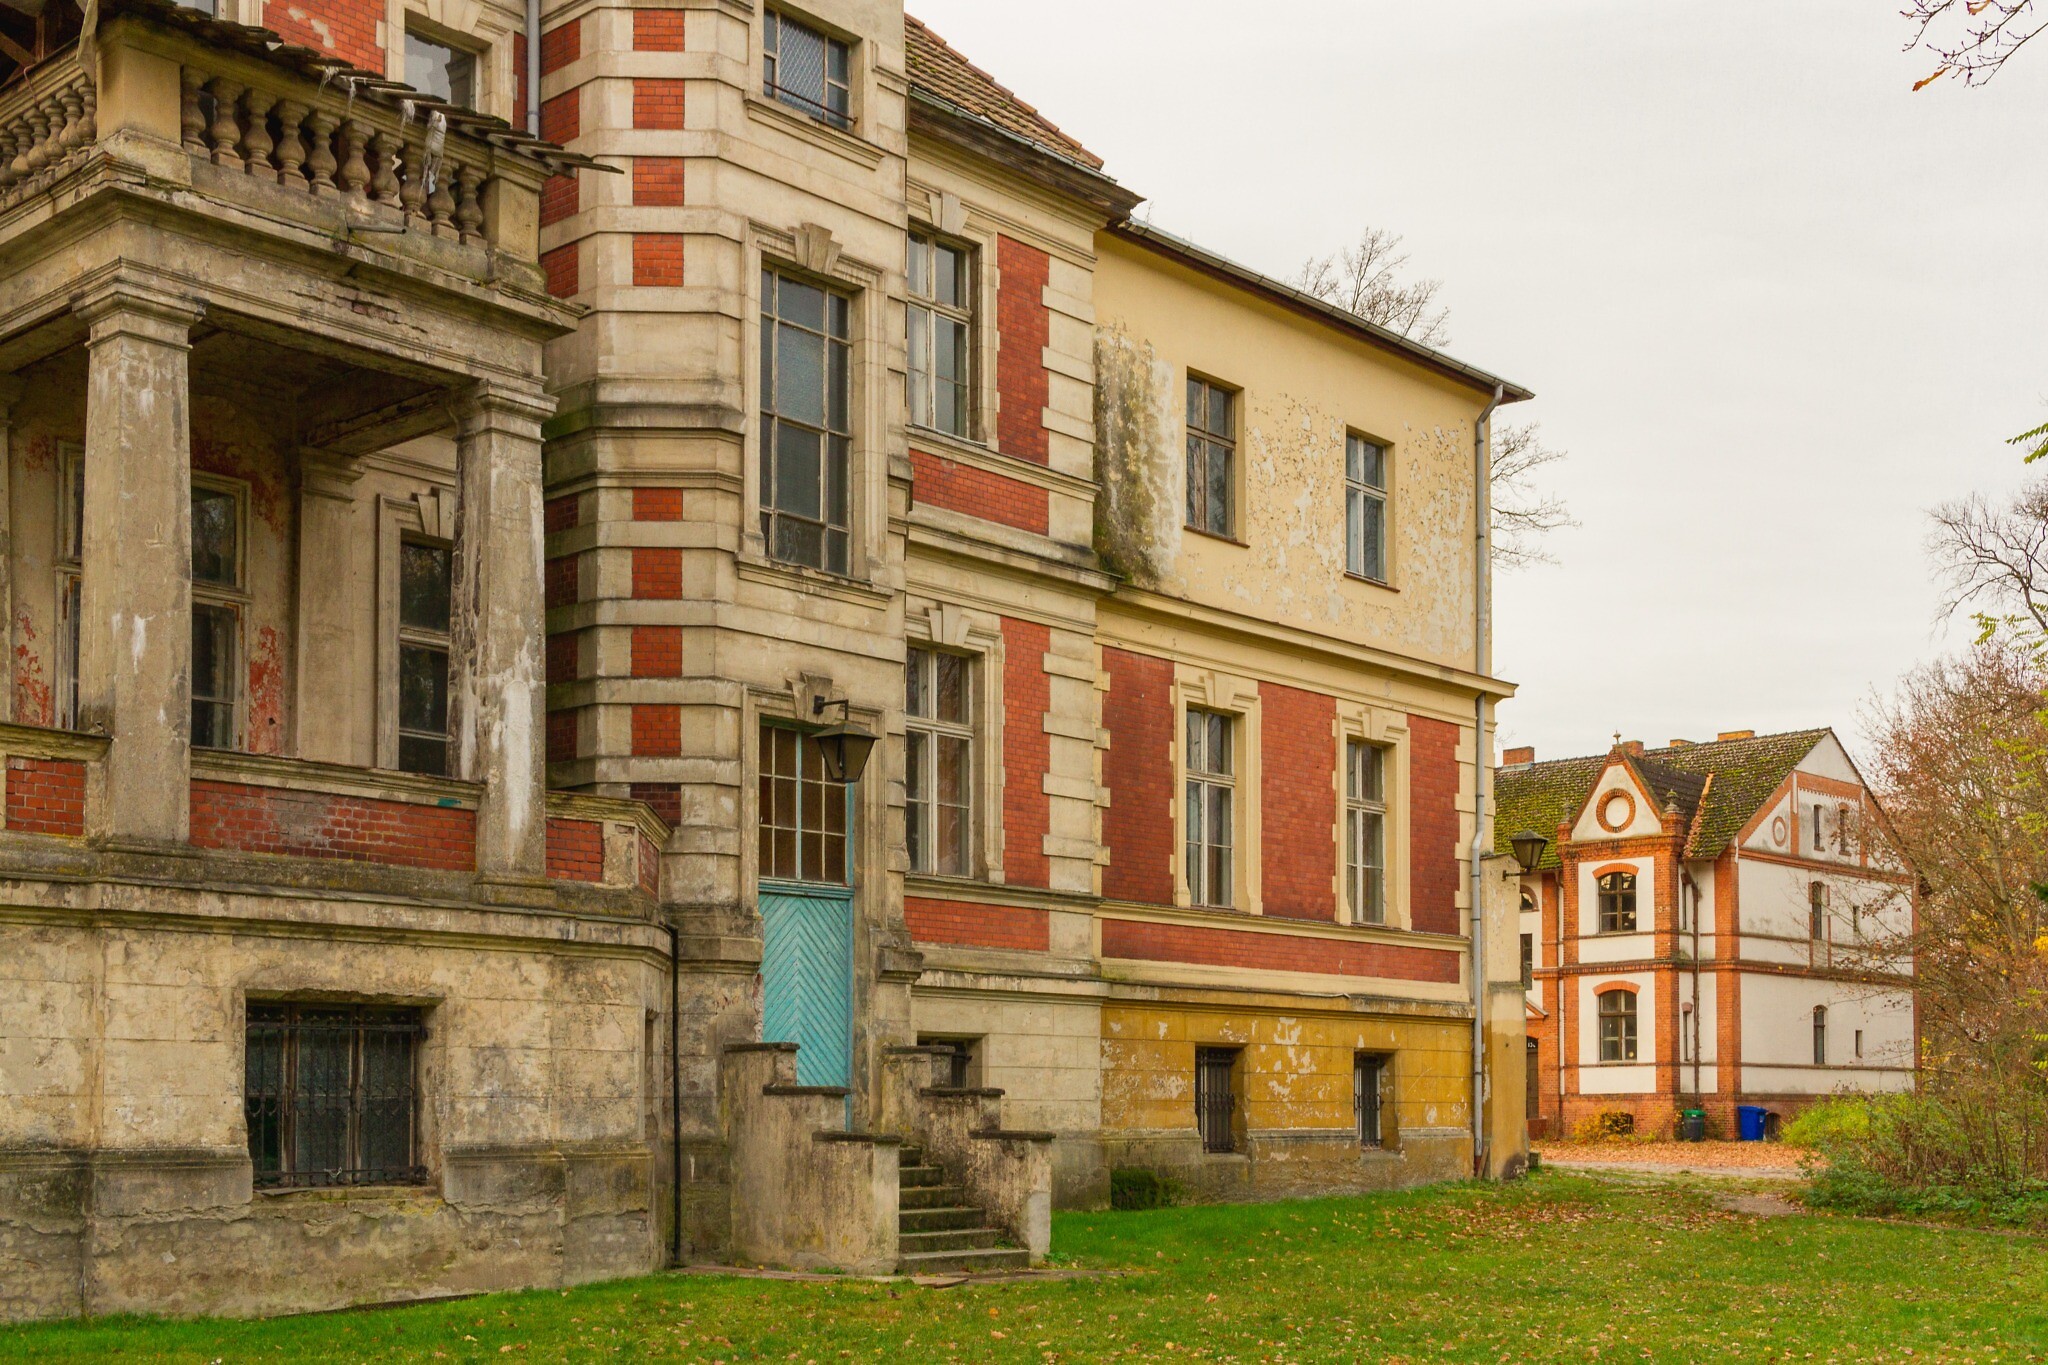 A location used for filming 'Queen's Gambit,' Schloss Schulzendorf in Germany, outside Berlin, November 2020. (courtesy: Felipe Tofani/Fotostrasse.com)